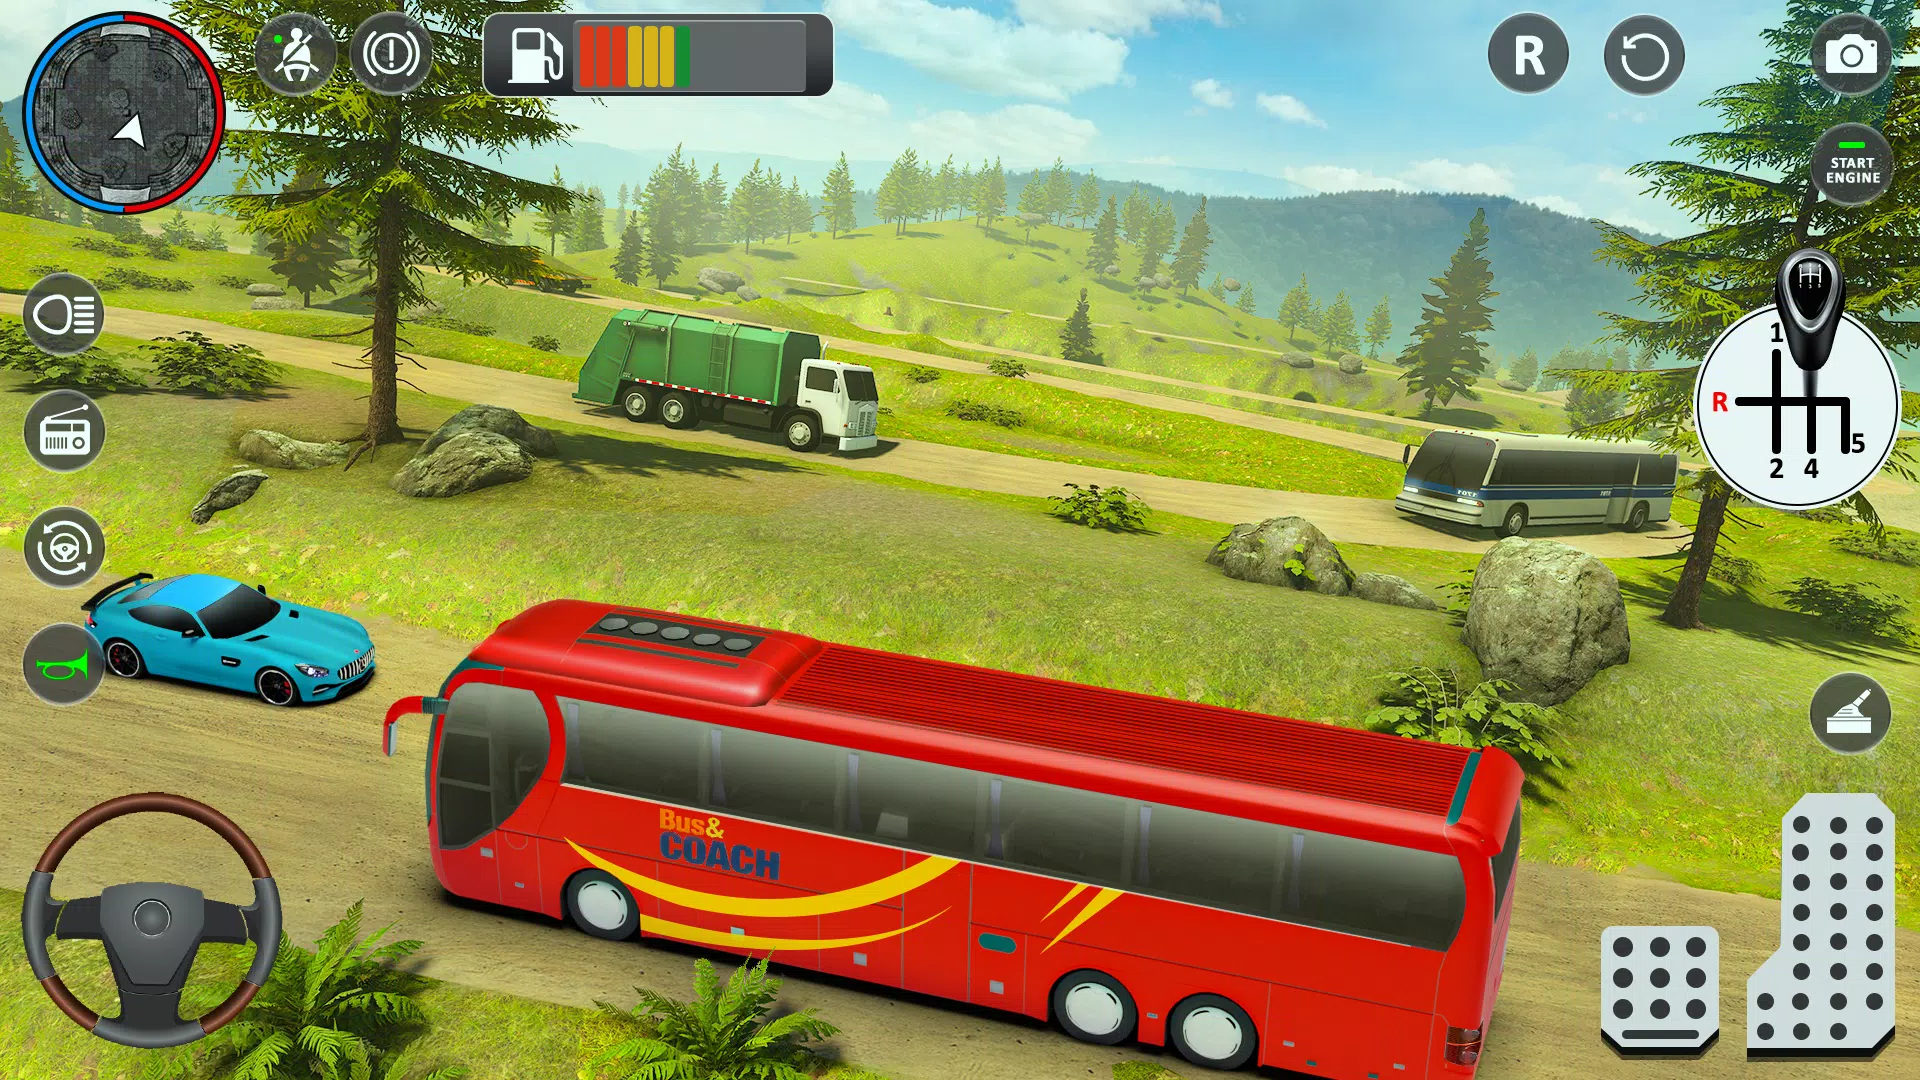 Play Bus Simulator - Bus Games 3D Online for Free on PC & Mobile